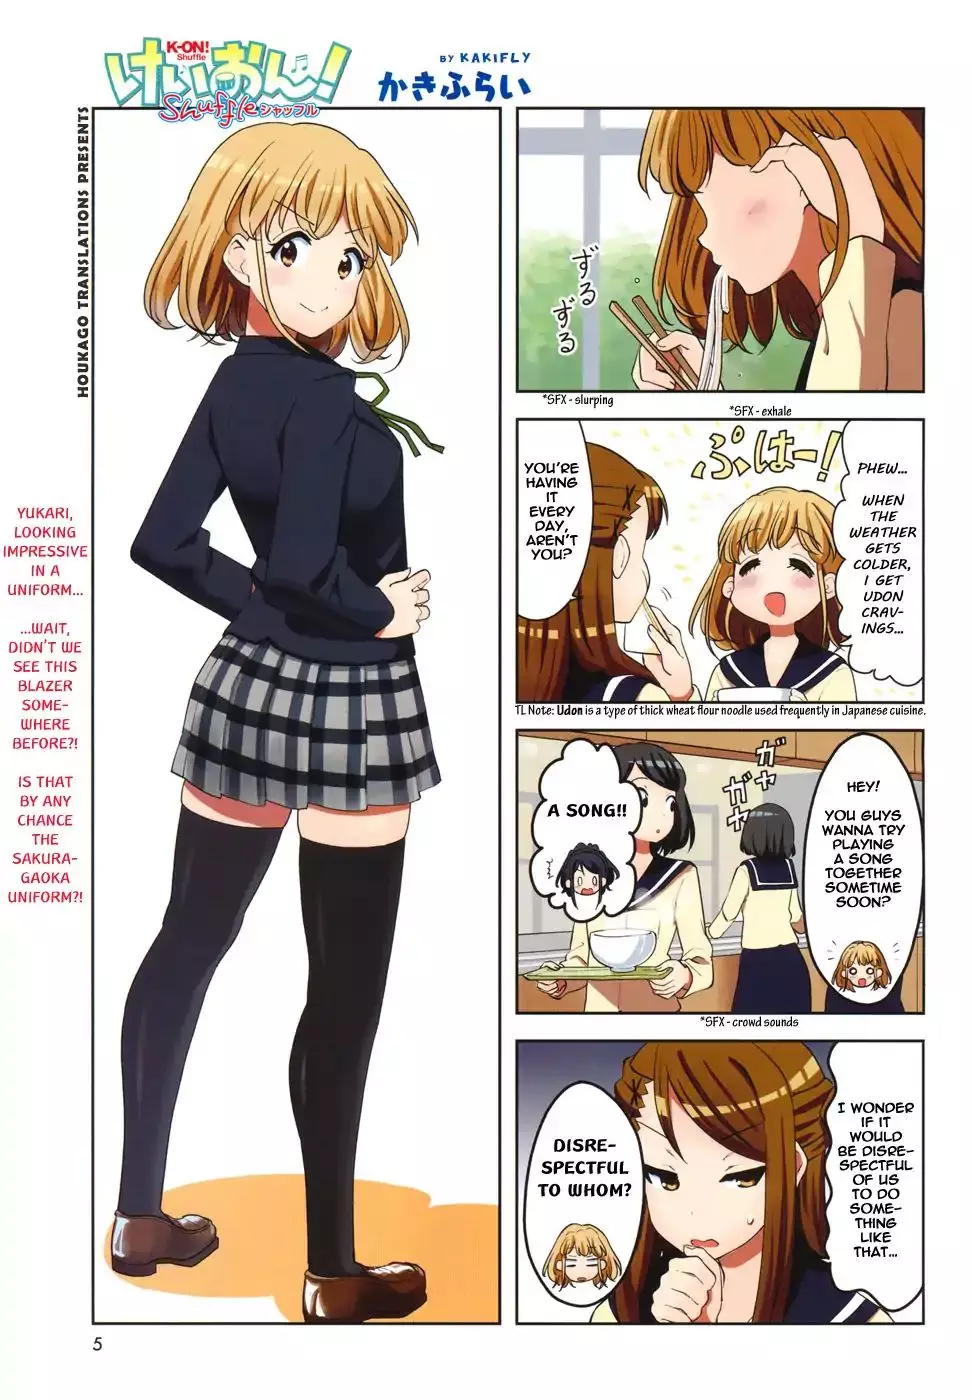 K-On! Shuffle - 7 page 1